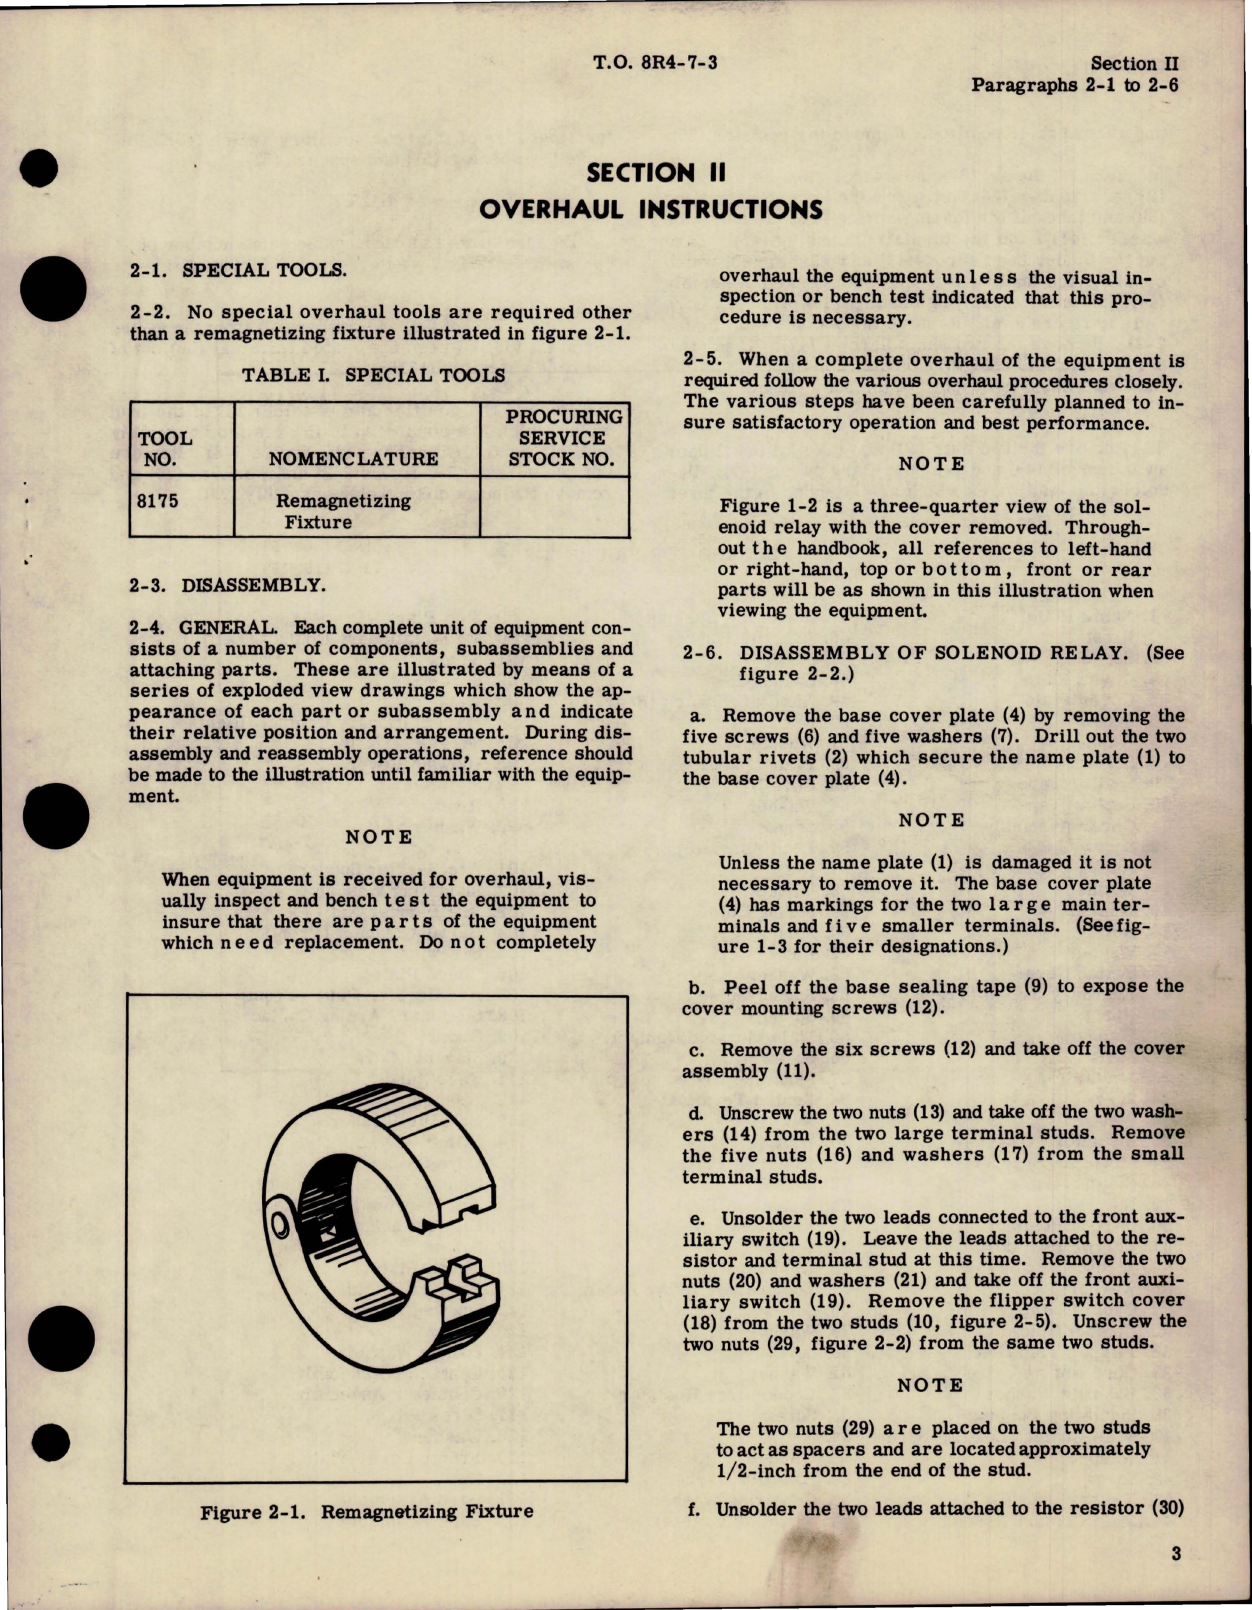 Sample page 7 from AirCorps Library document: Overhaul Instructions for Solenoid Relay - Type T-I